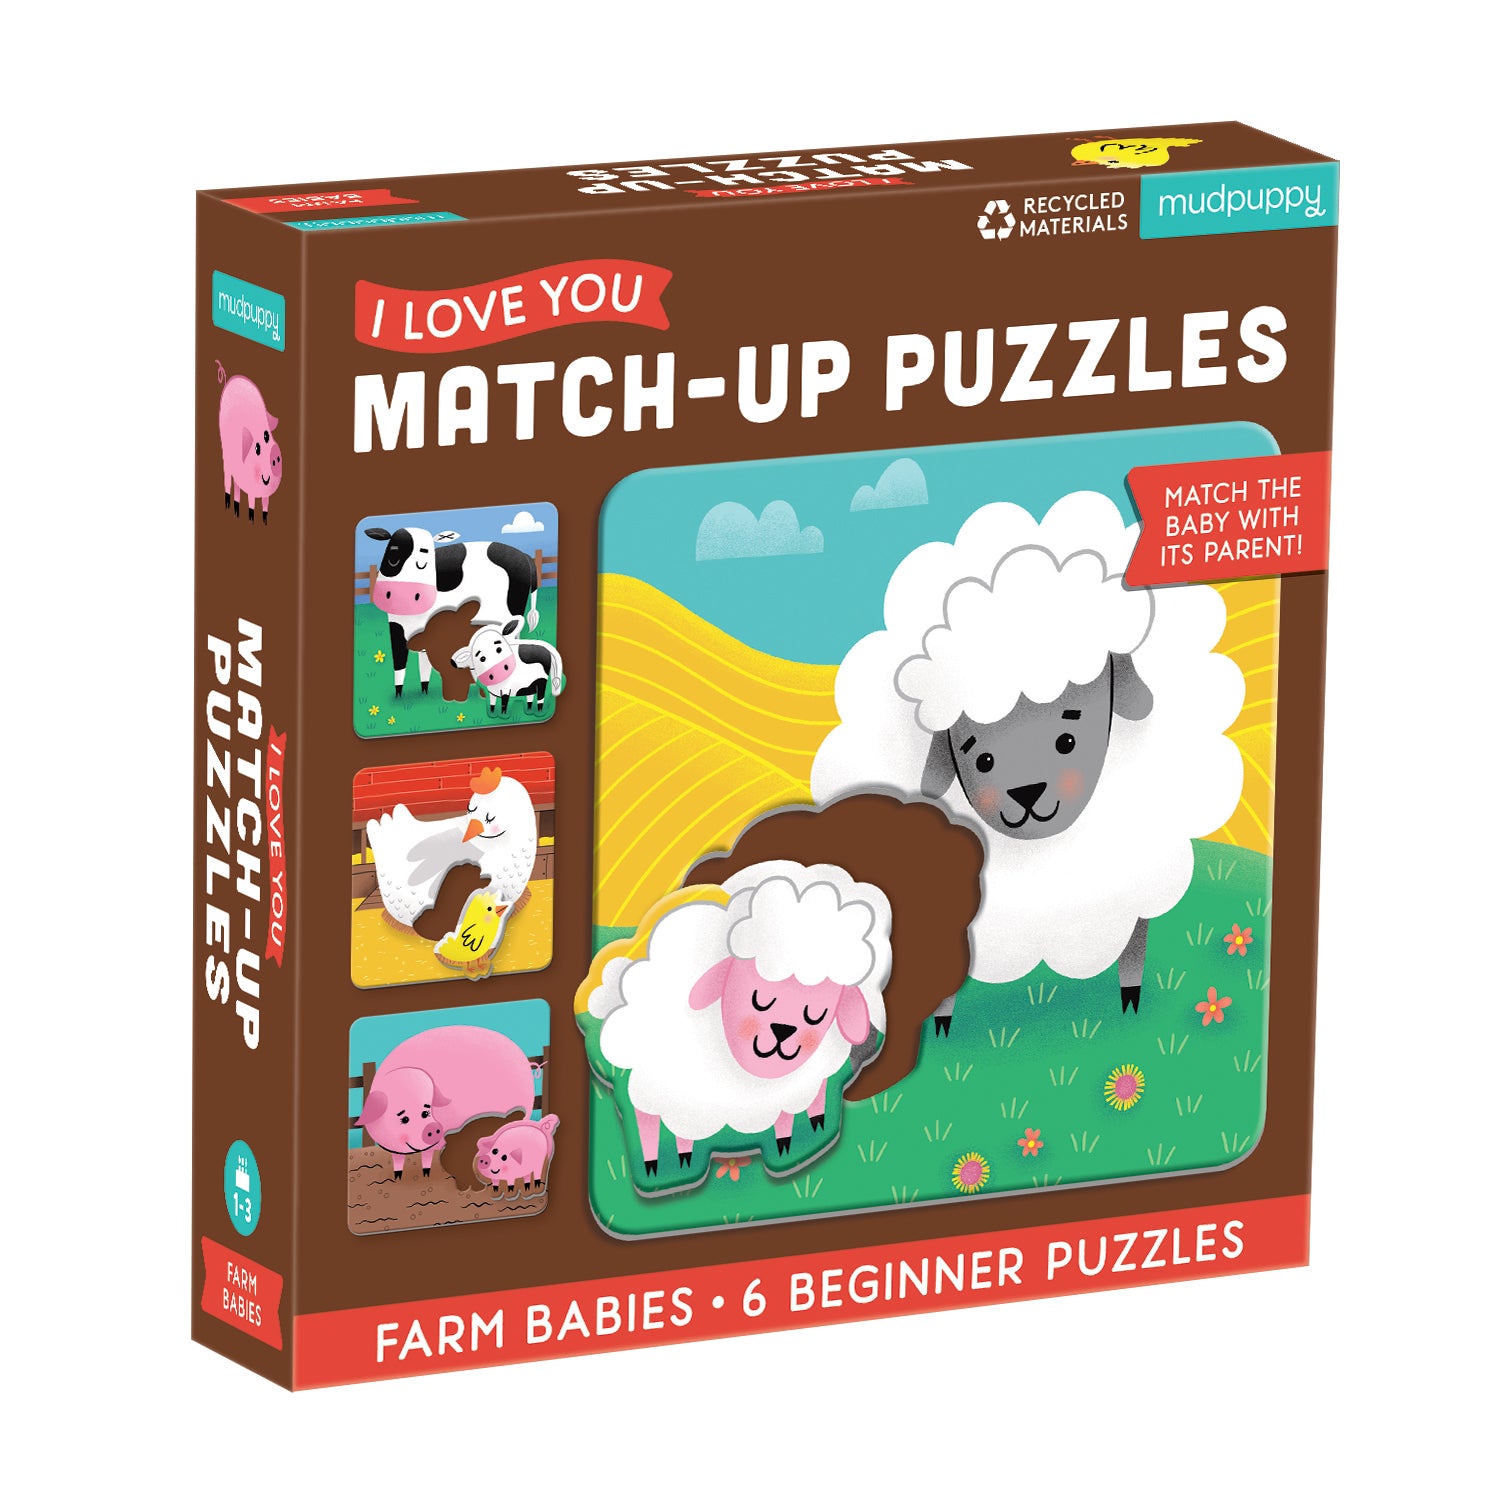 Mill & Hide - Bobangles - Mudpuppy  - I Love You Match-up Puzzles - Farm Babies